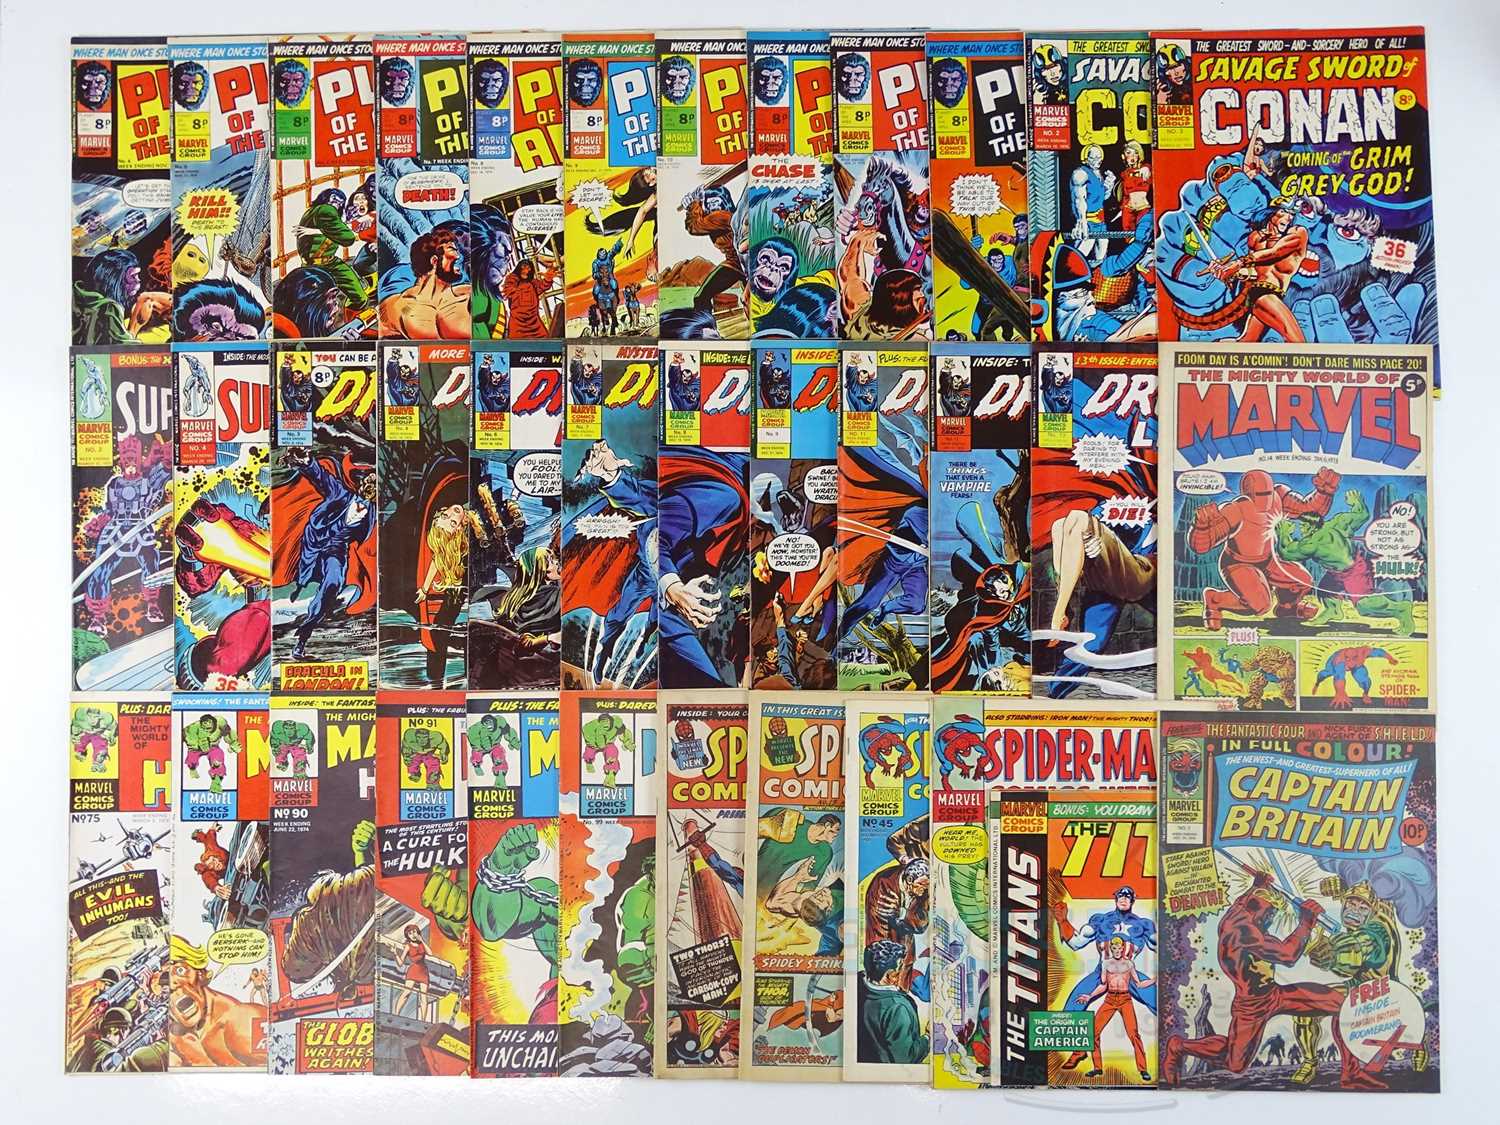 MIXED BRITISH MARVEL LOT (36 in Lot - BRITISH MARVEL) Includes SPIDER-MAN COMICS WEEKLY (1973/74) #